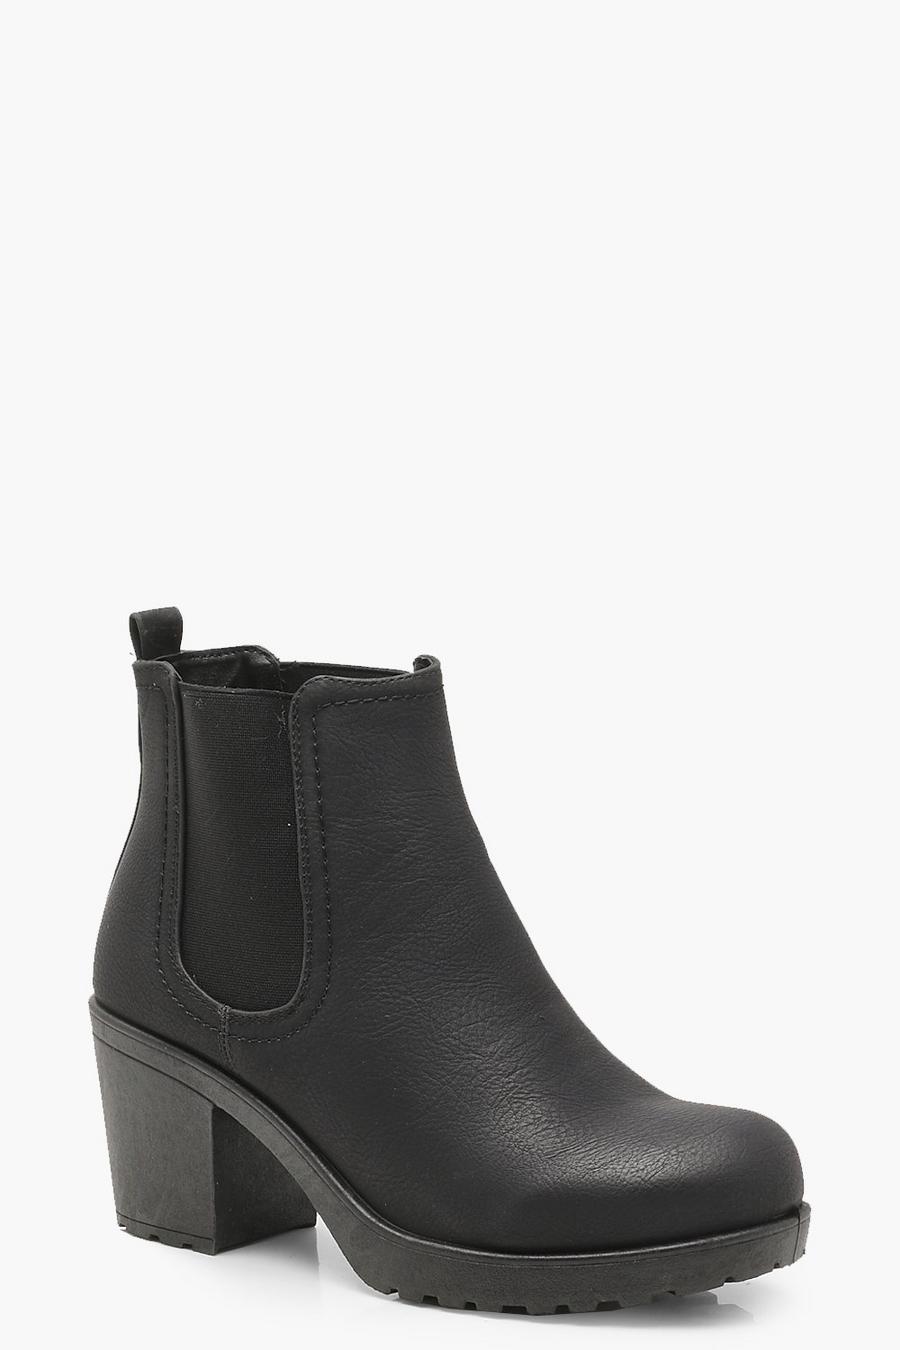 Black Wide Fit Chunky Cleated Heel Chelsea Boots